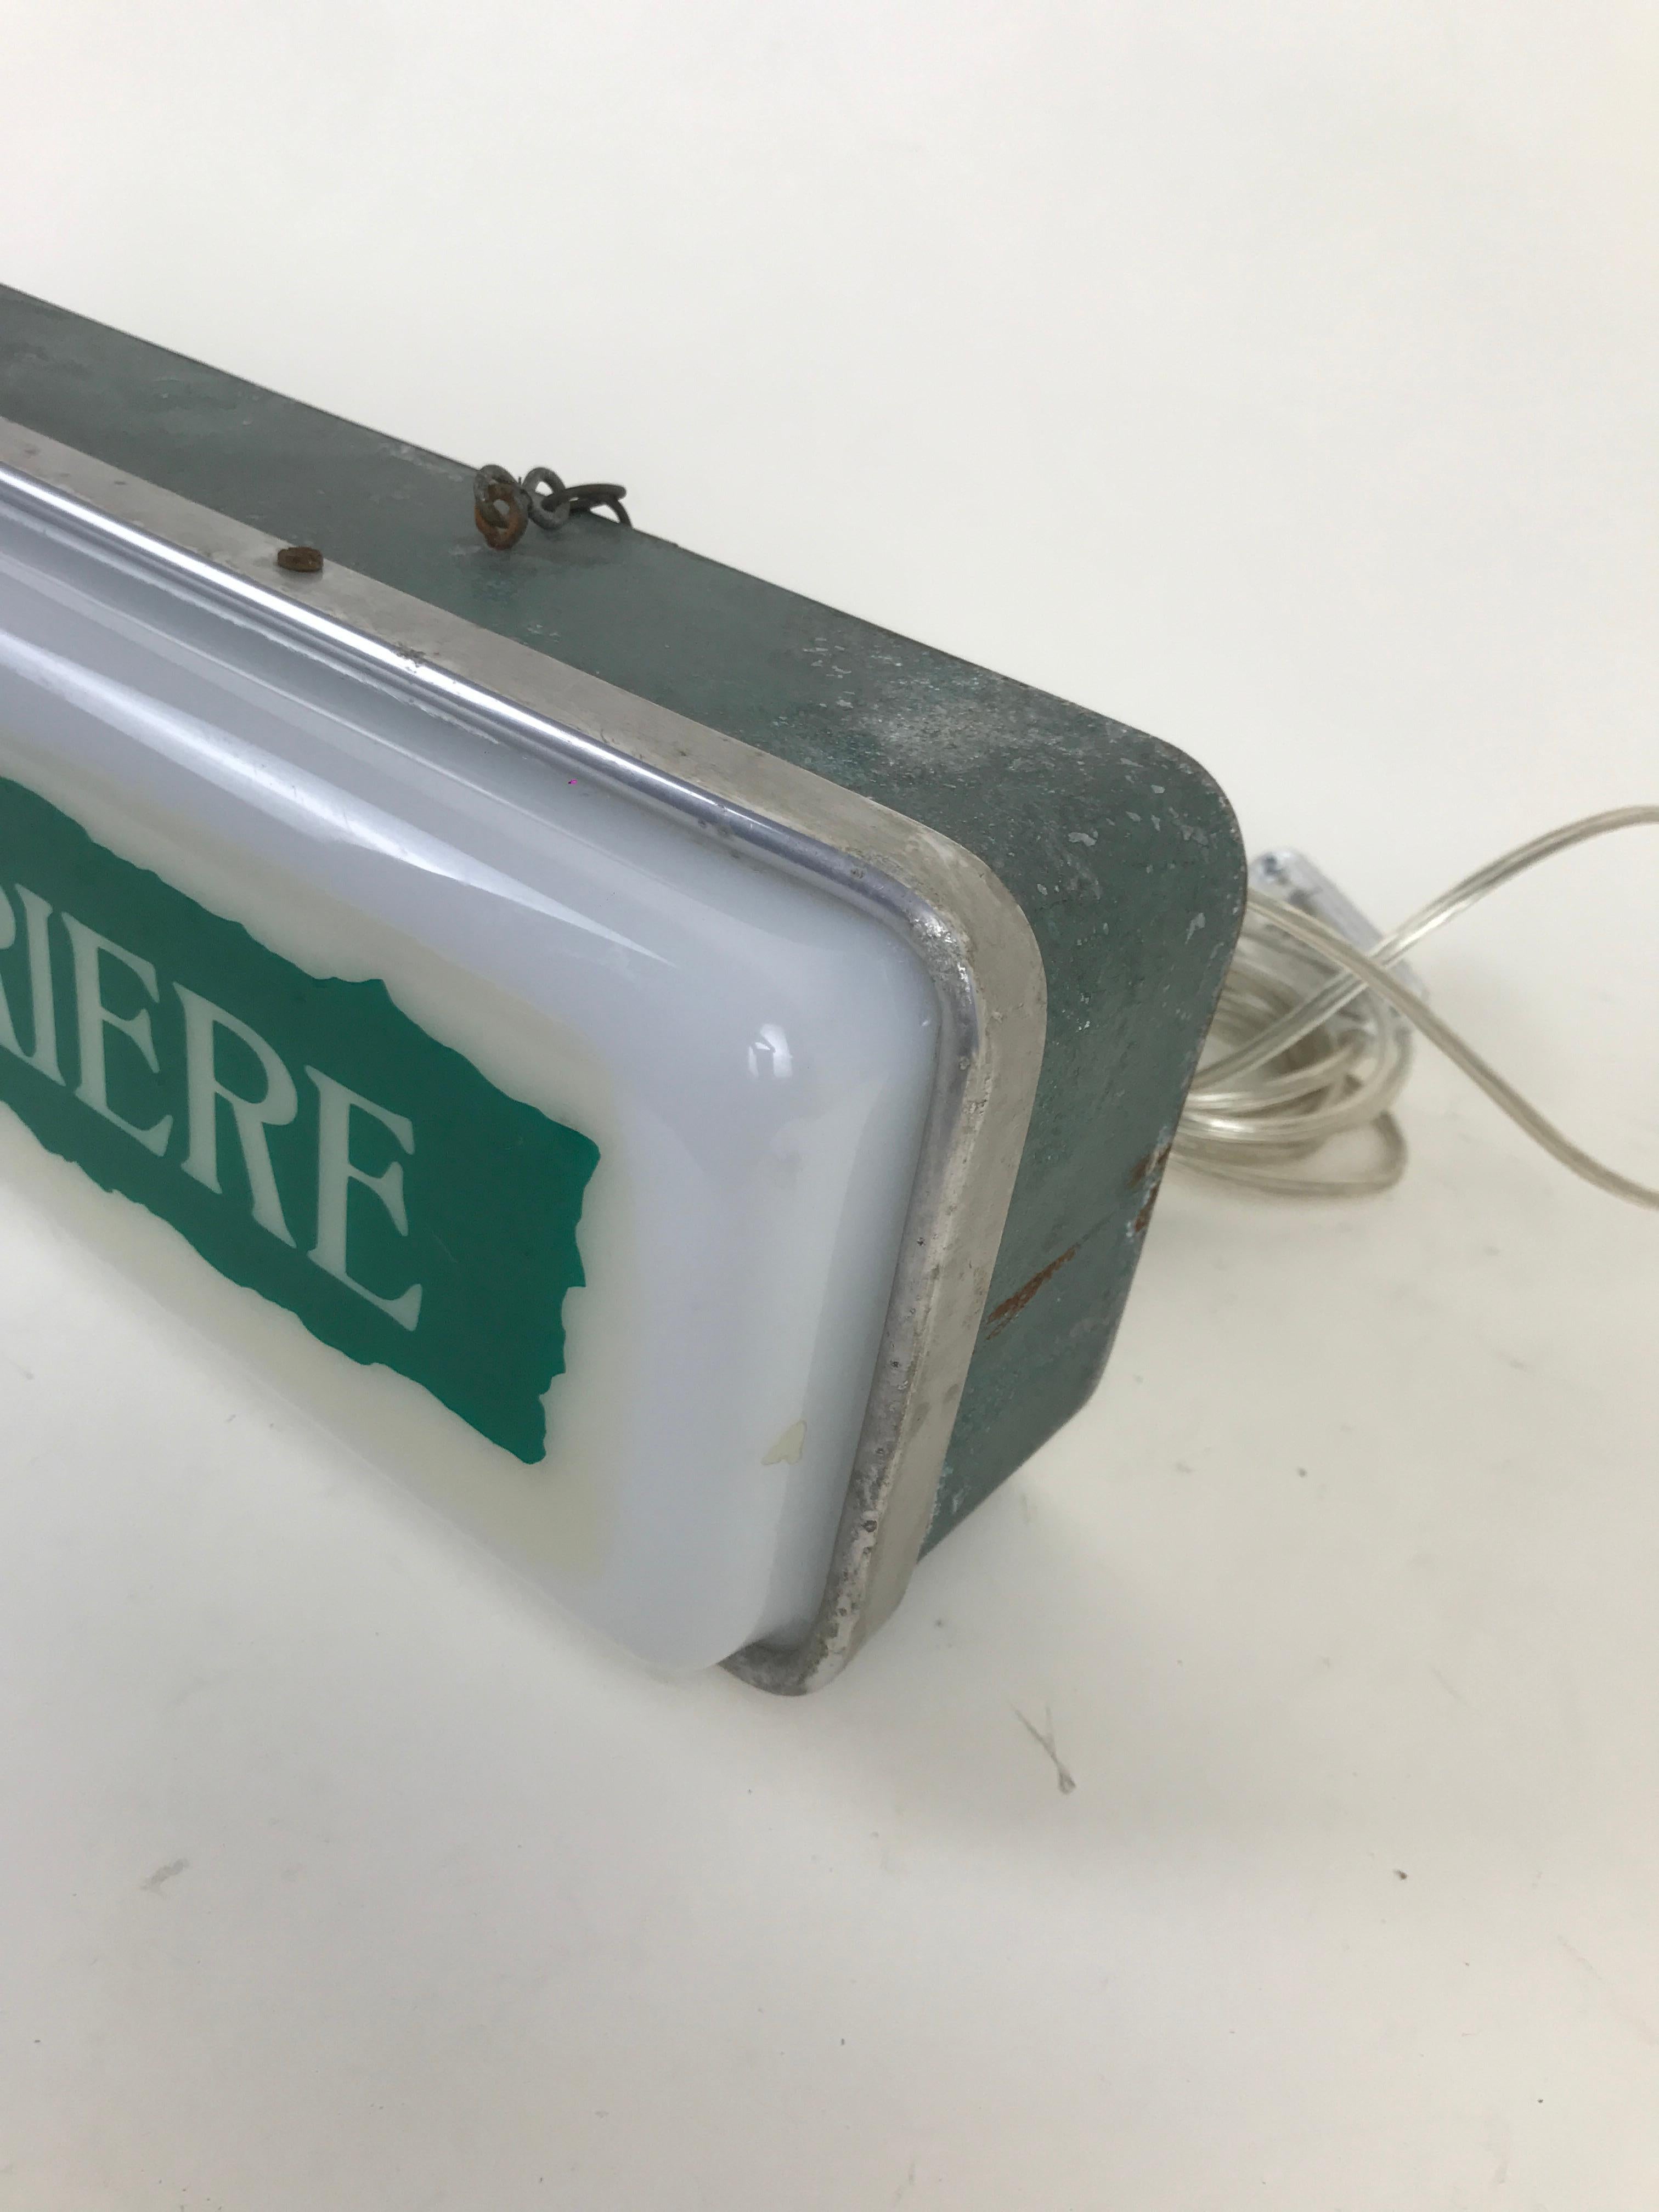 1950s Vintage Green and White Domenica del Corriere Newspaper Illuminated Sign For Sale 2